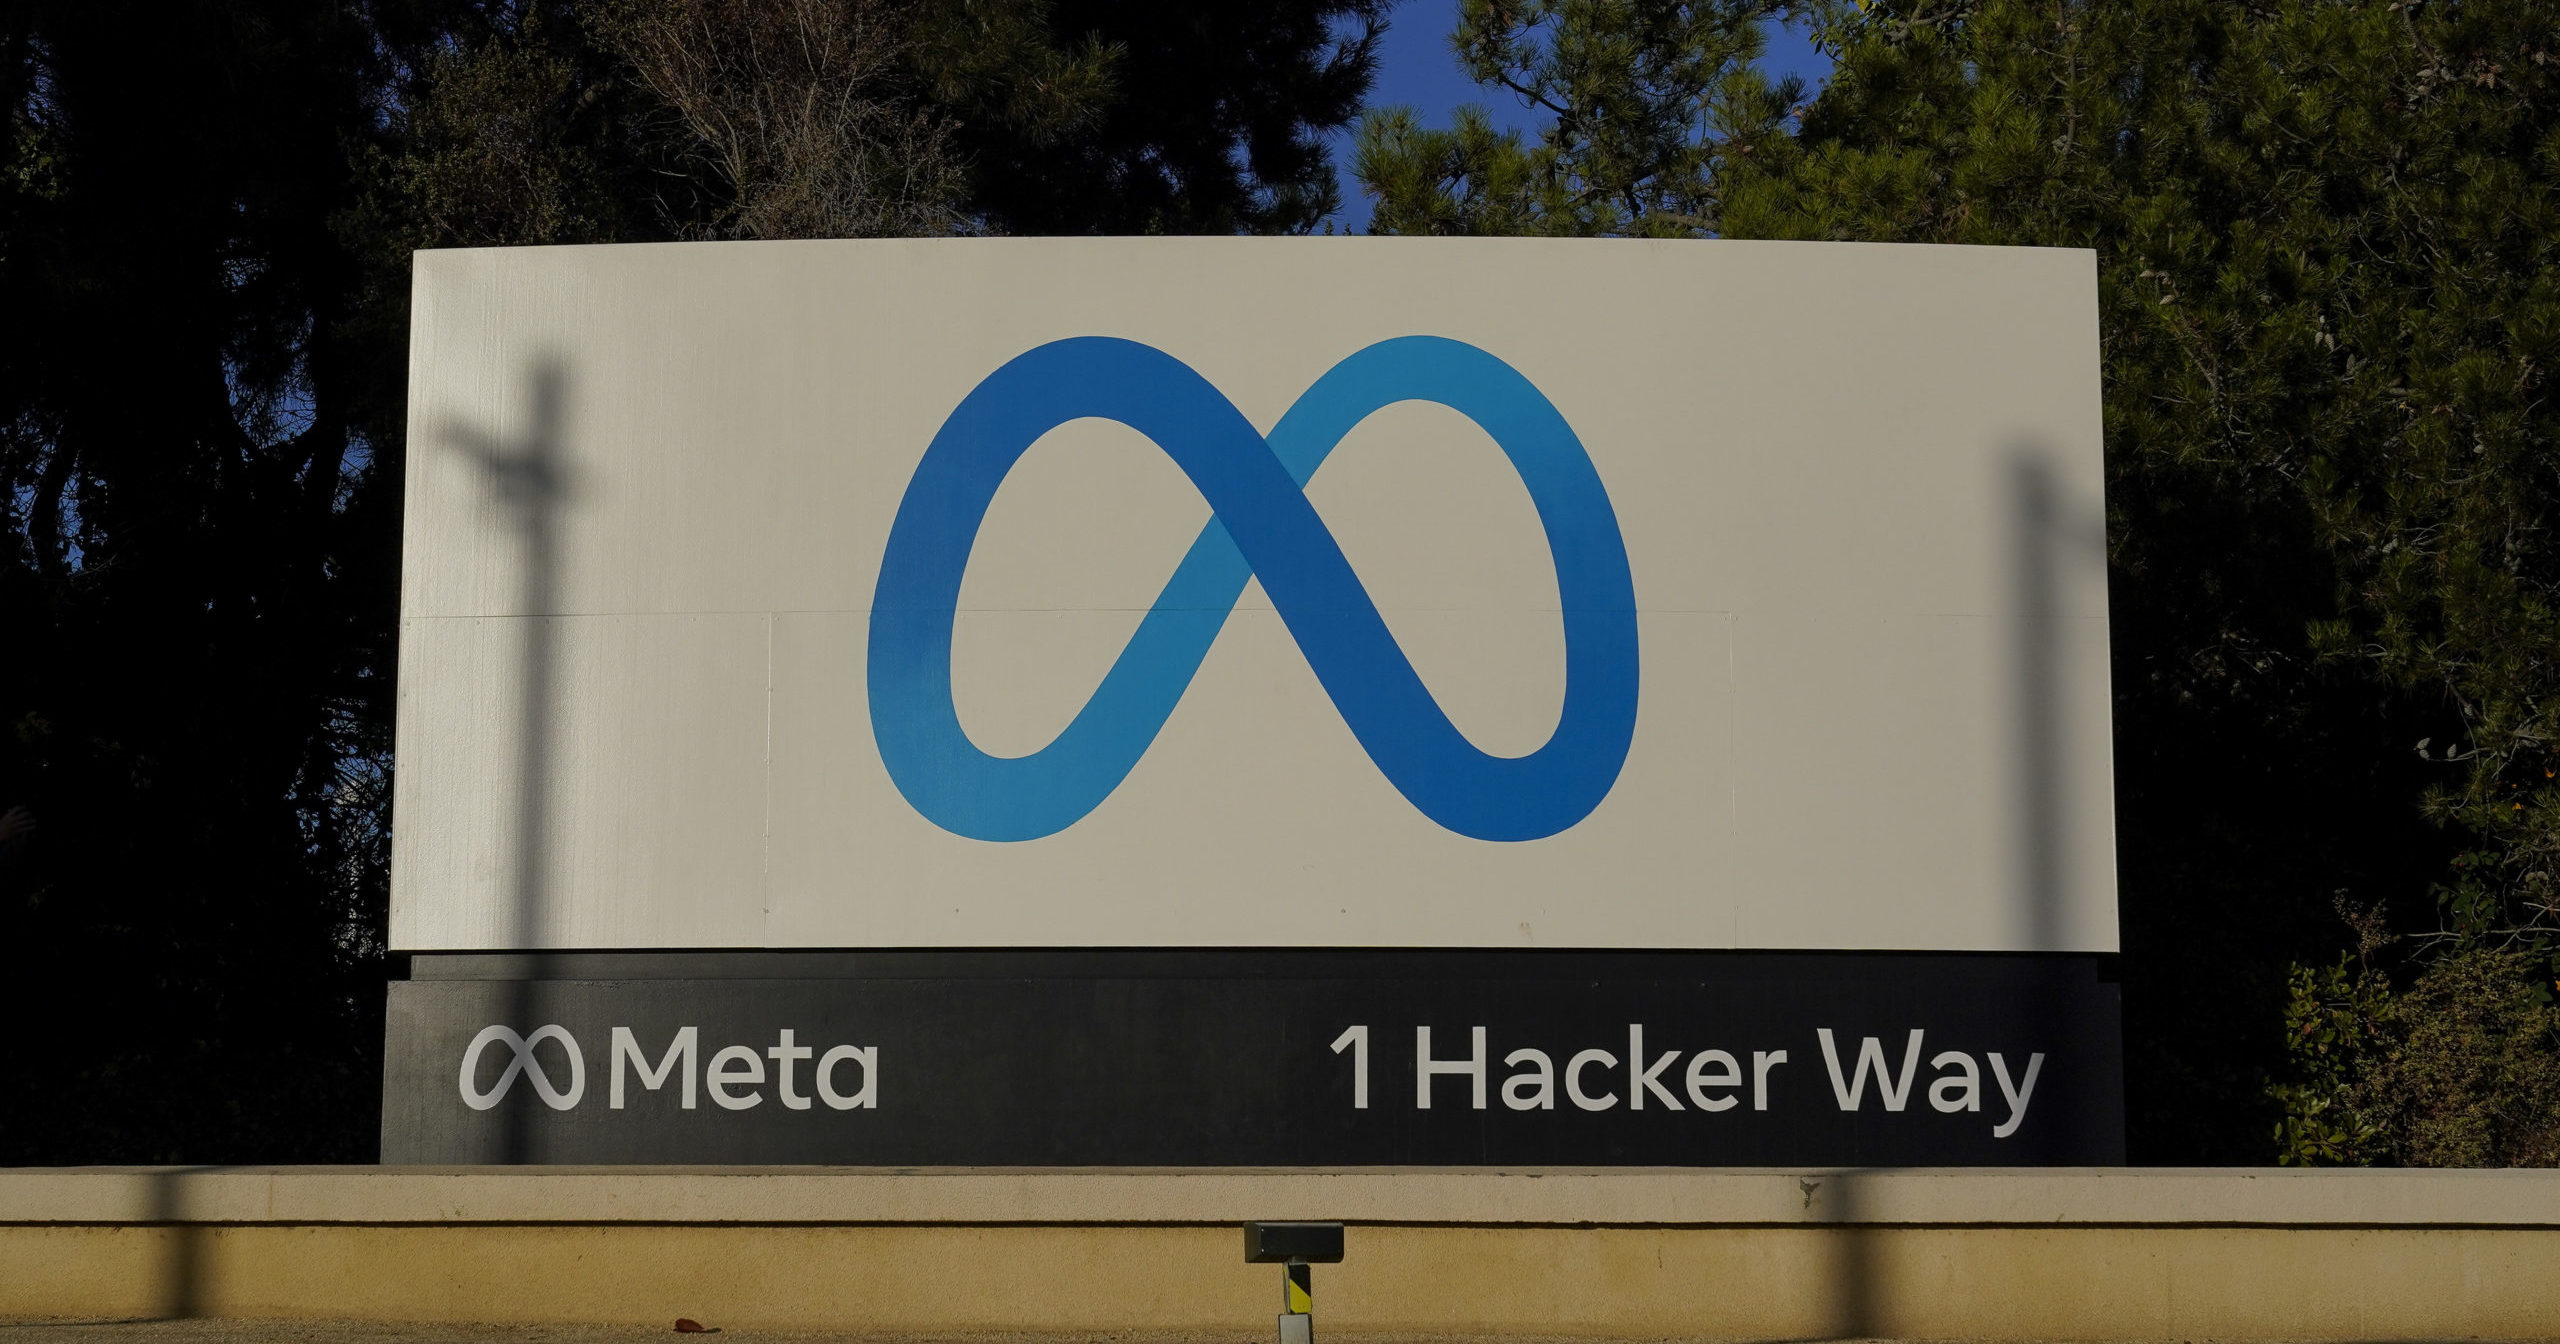 Meta's logo can be seen on a sign at the company's headquarters in Menlo Park, California, on Nov. 9.